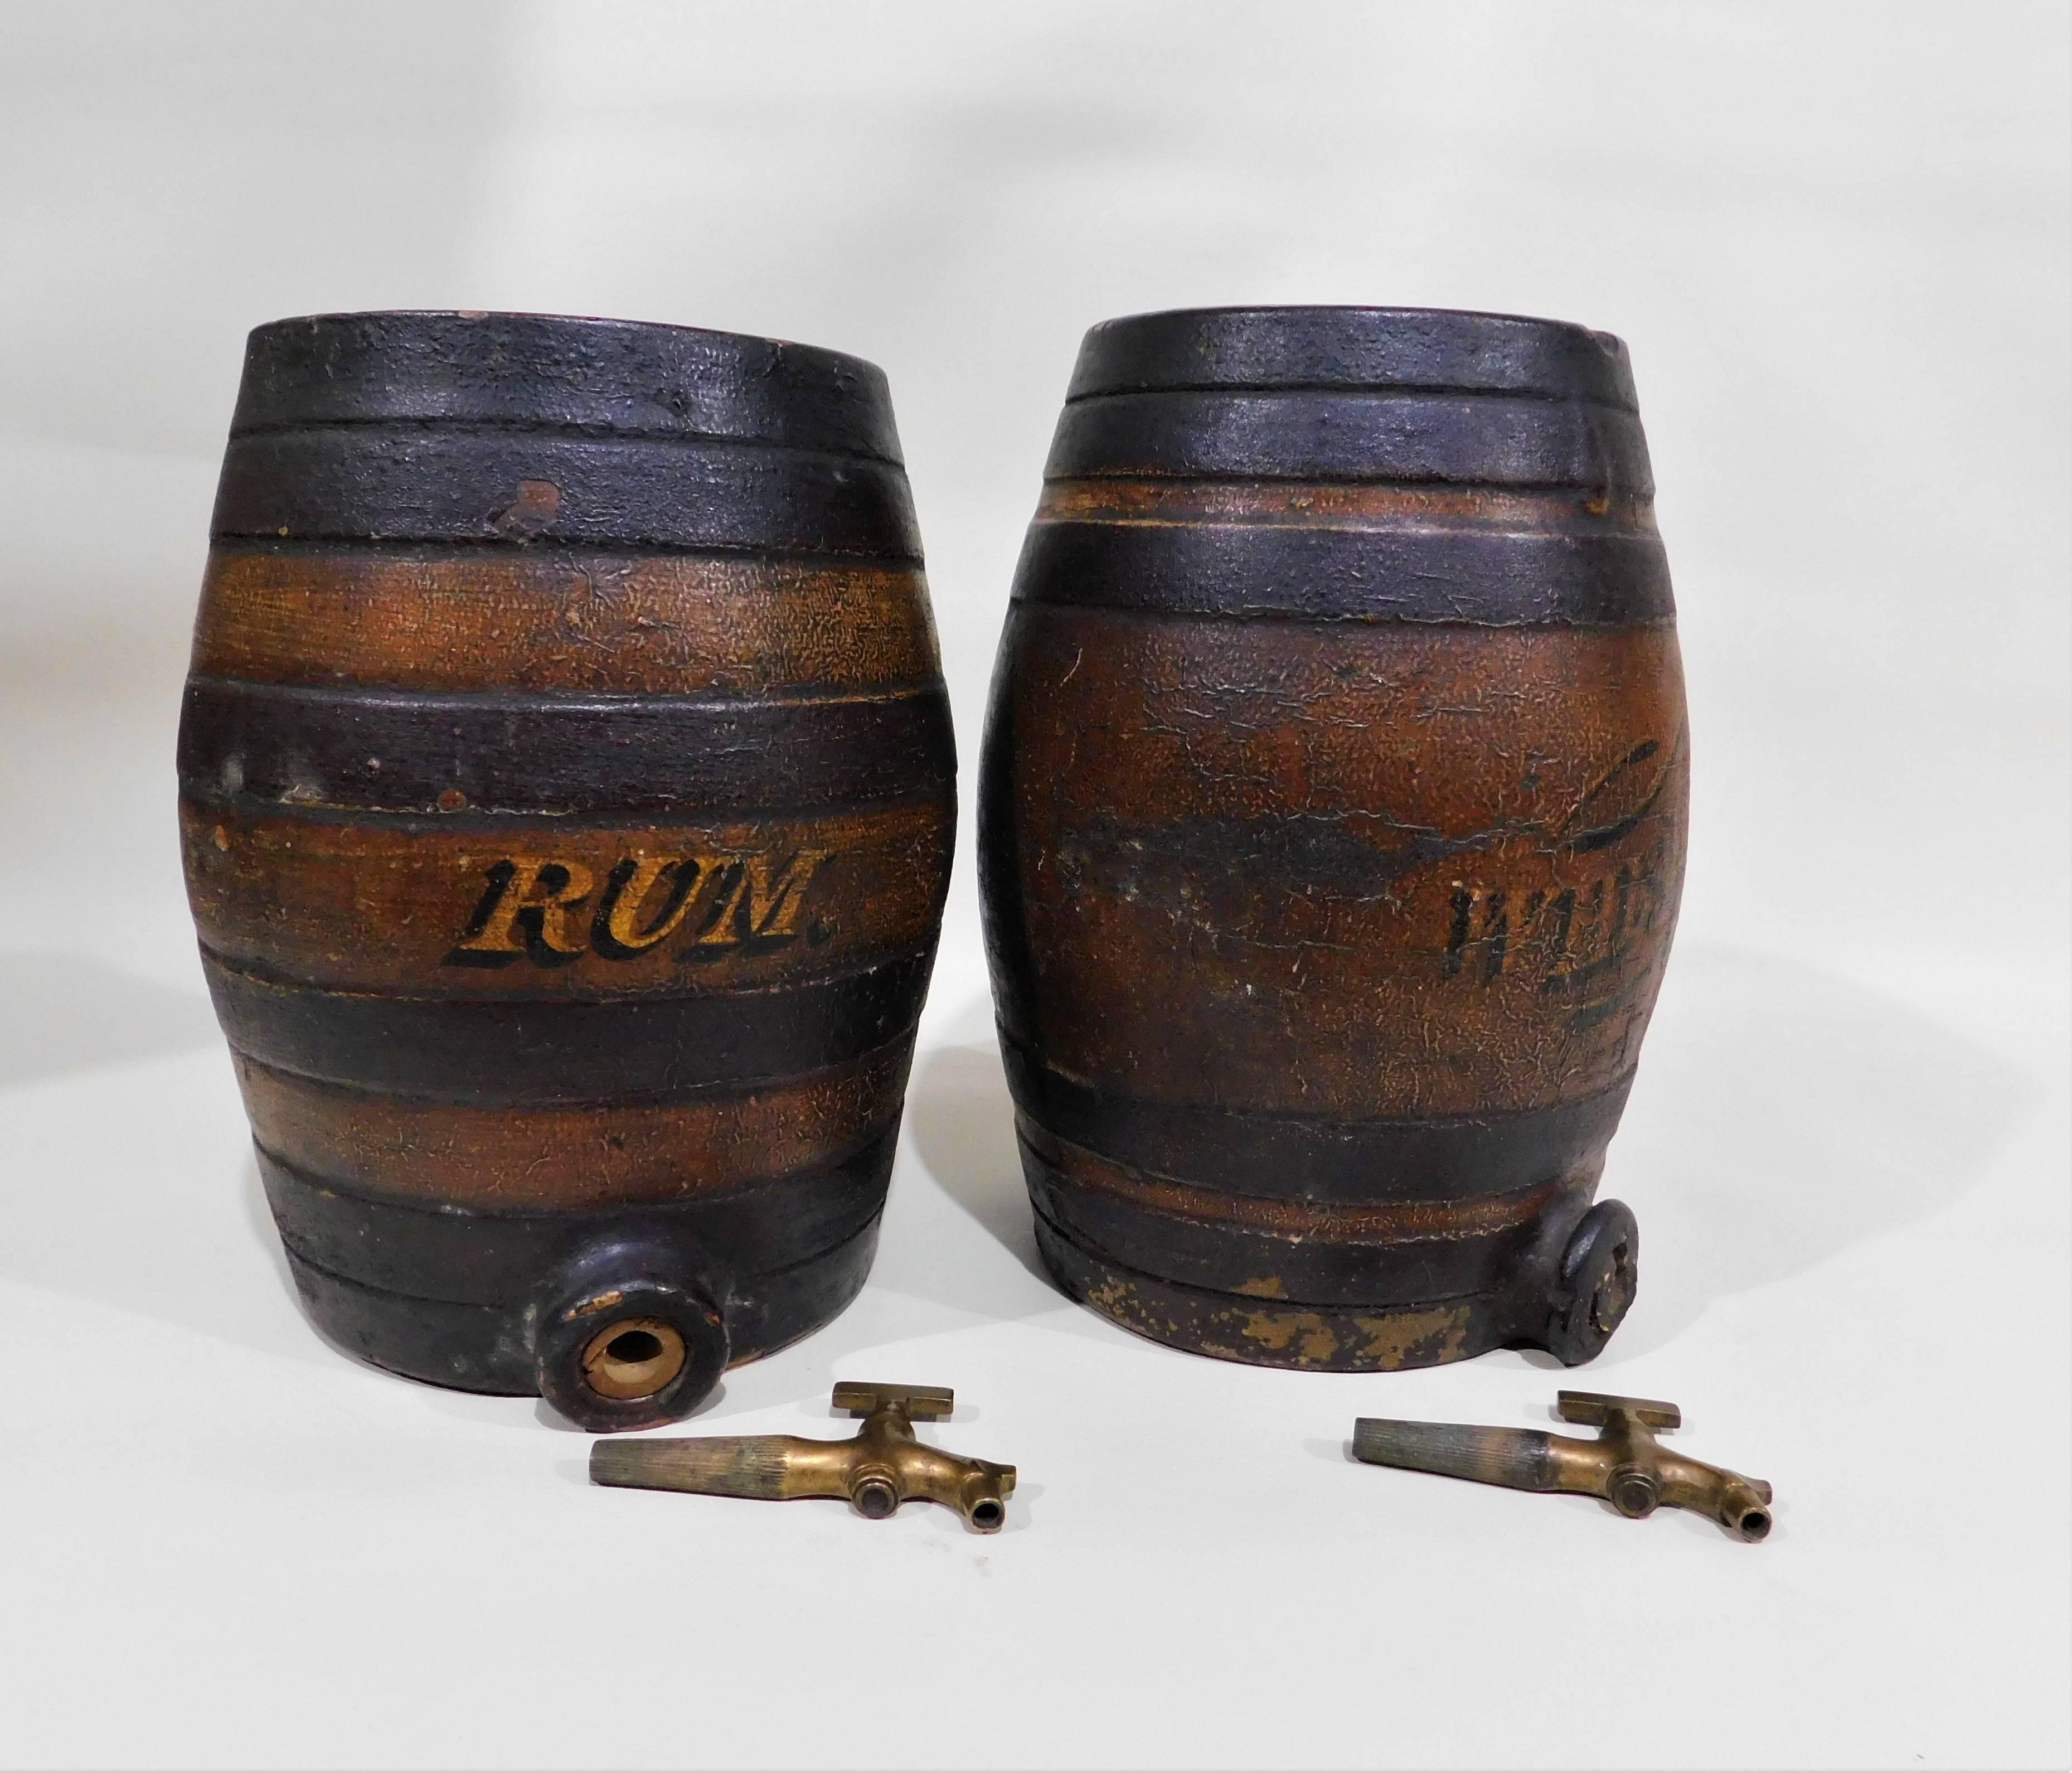 19th Century Pair of Victorian Earthenware Pottery Rum and Whiskey Liquor Cask Barrel Kegs For Sale